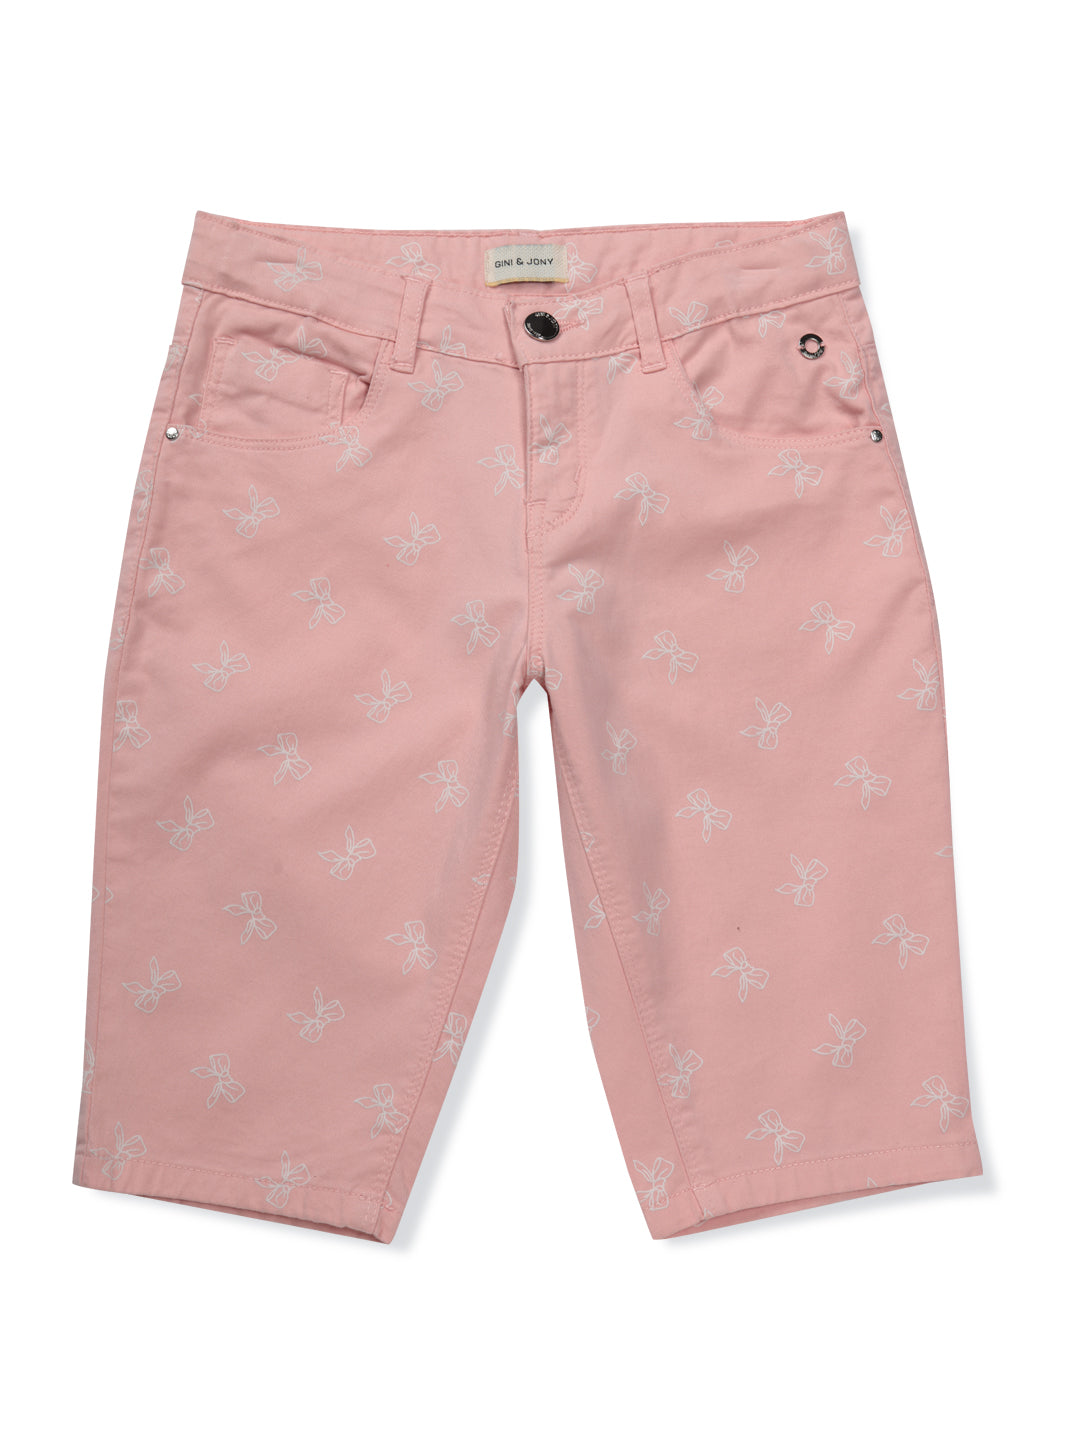 Girls Peach Printed Woven Pedal Pusher